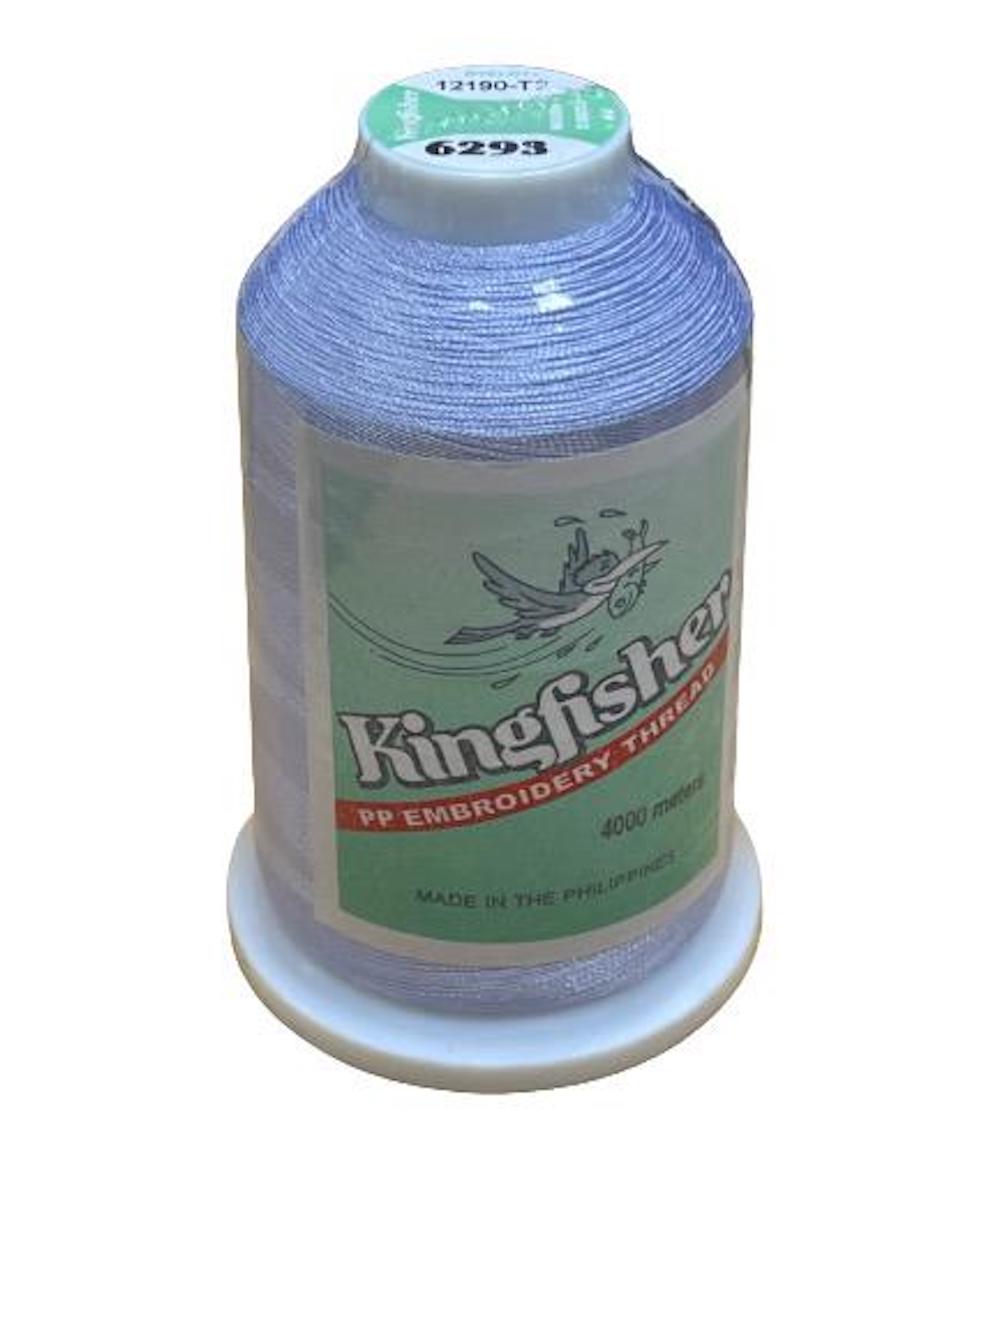 King Fisher Embroidery Thread 4000m 6293 - MY SEWING MALL